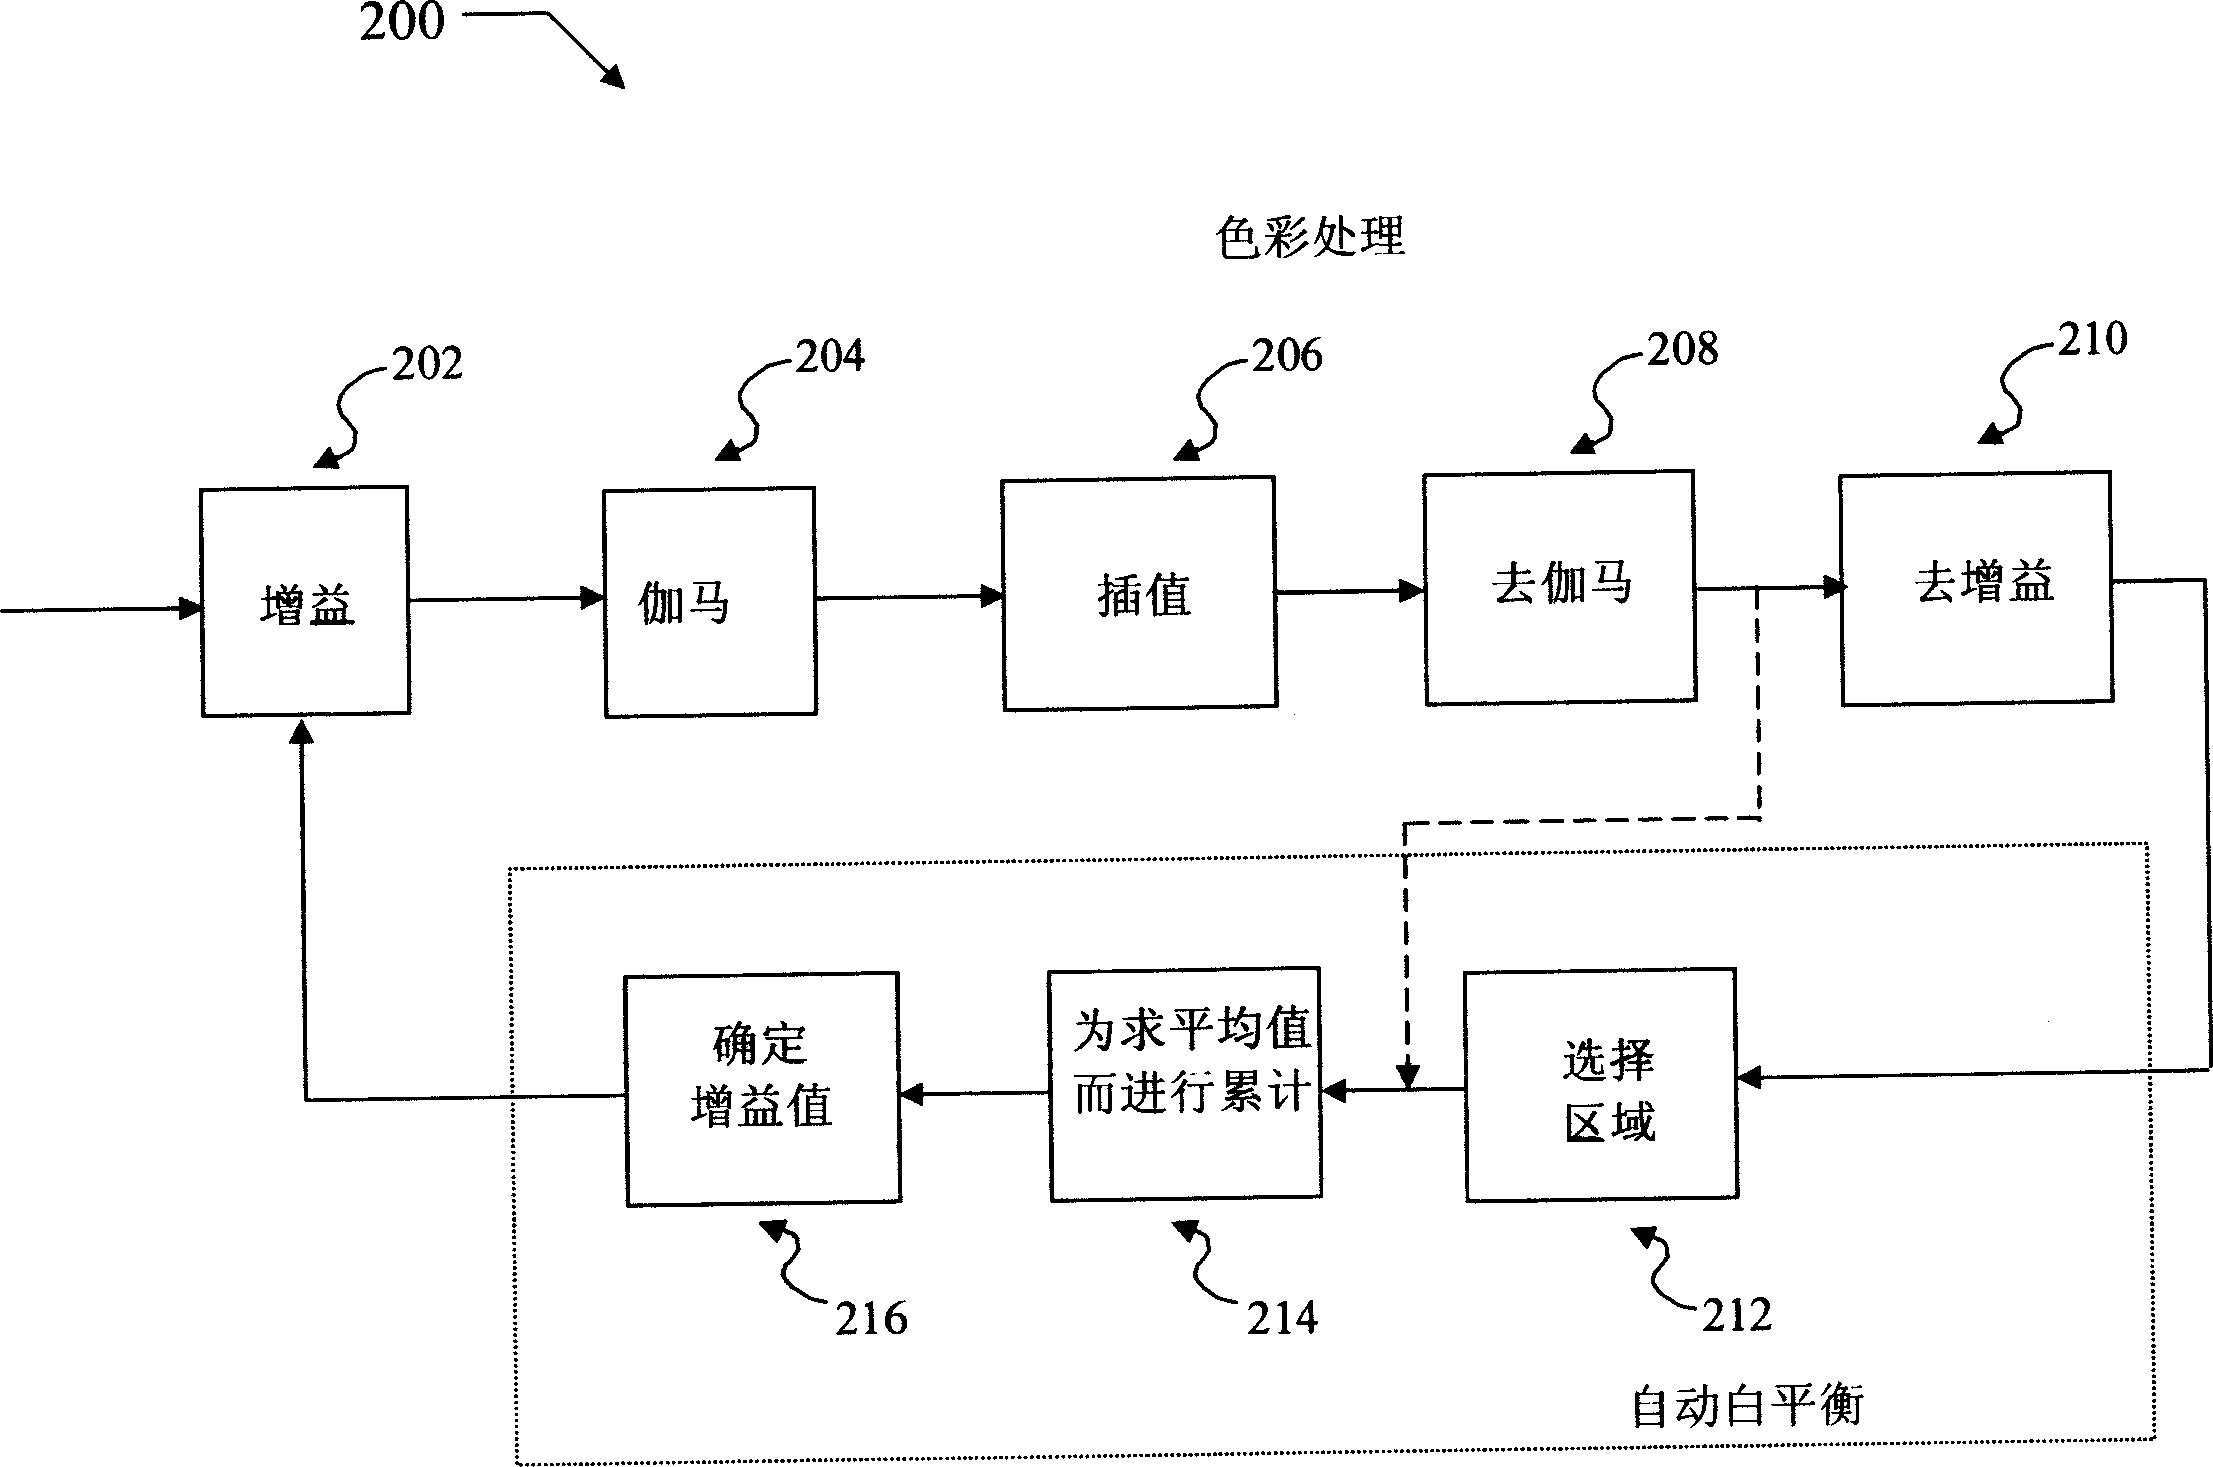 Method and apparatus for automatic white balance